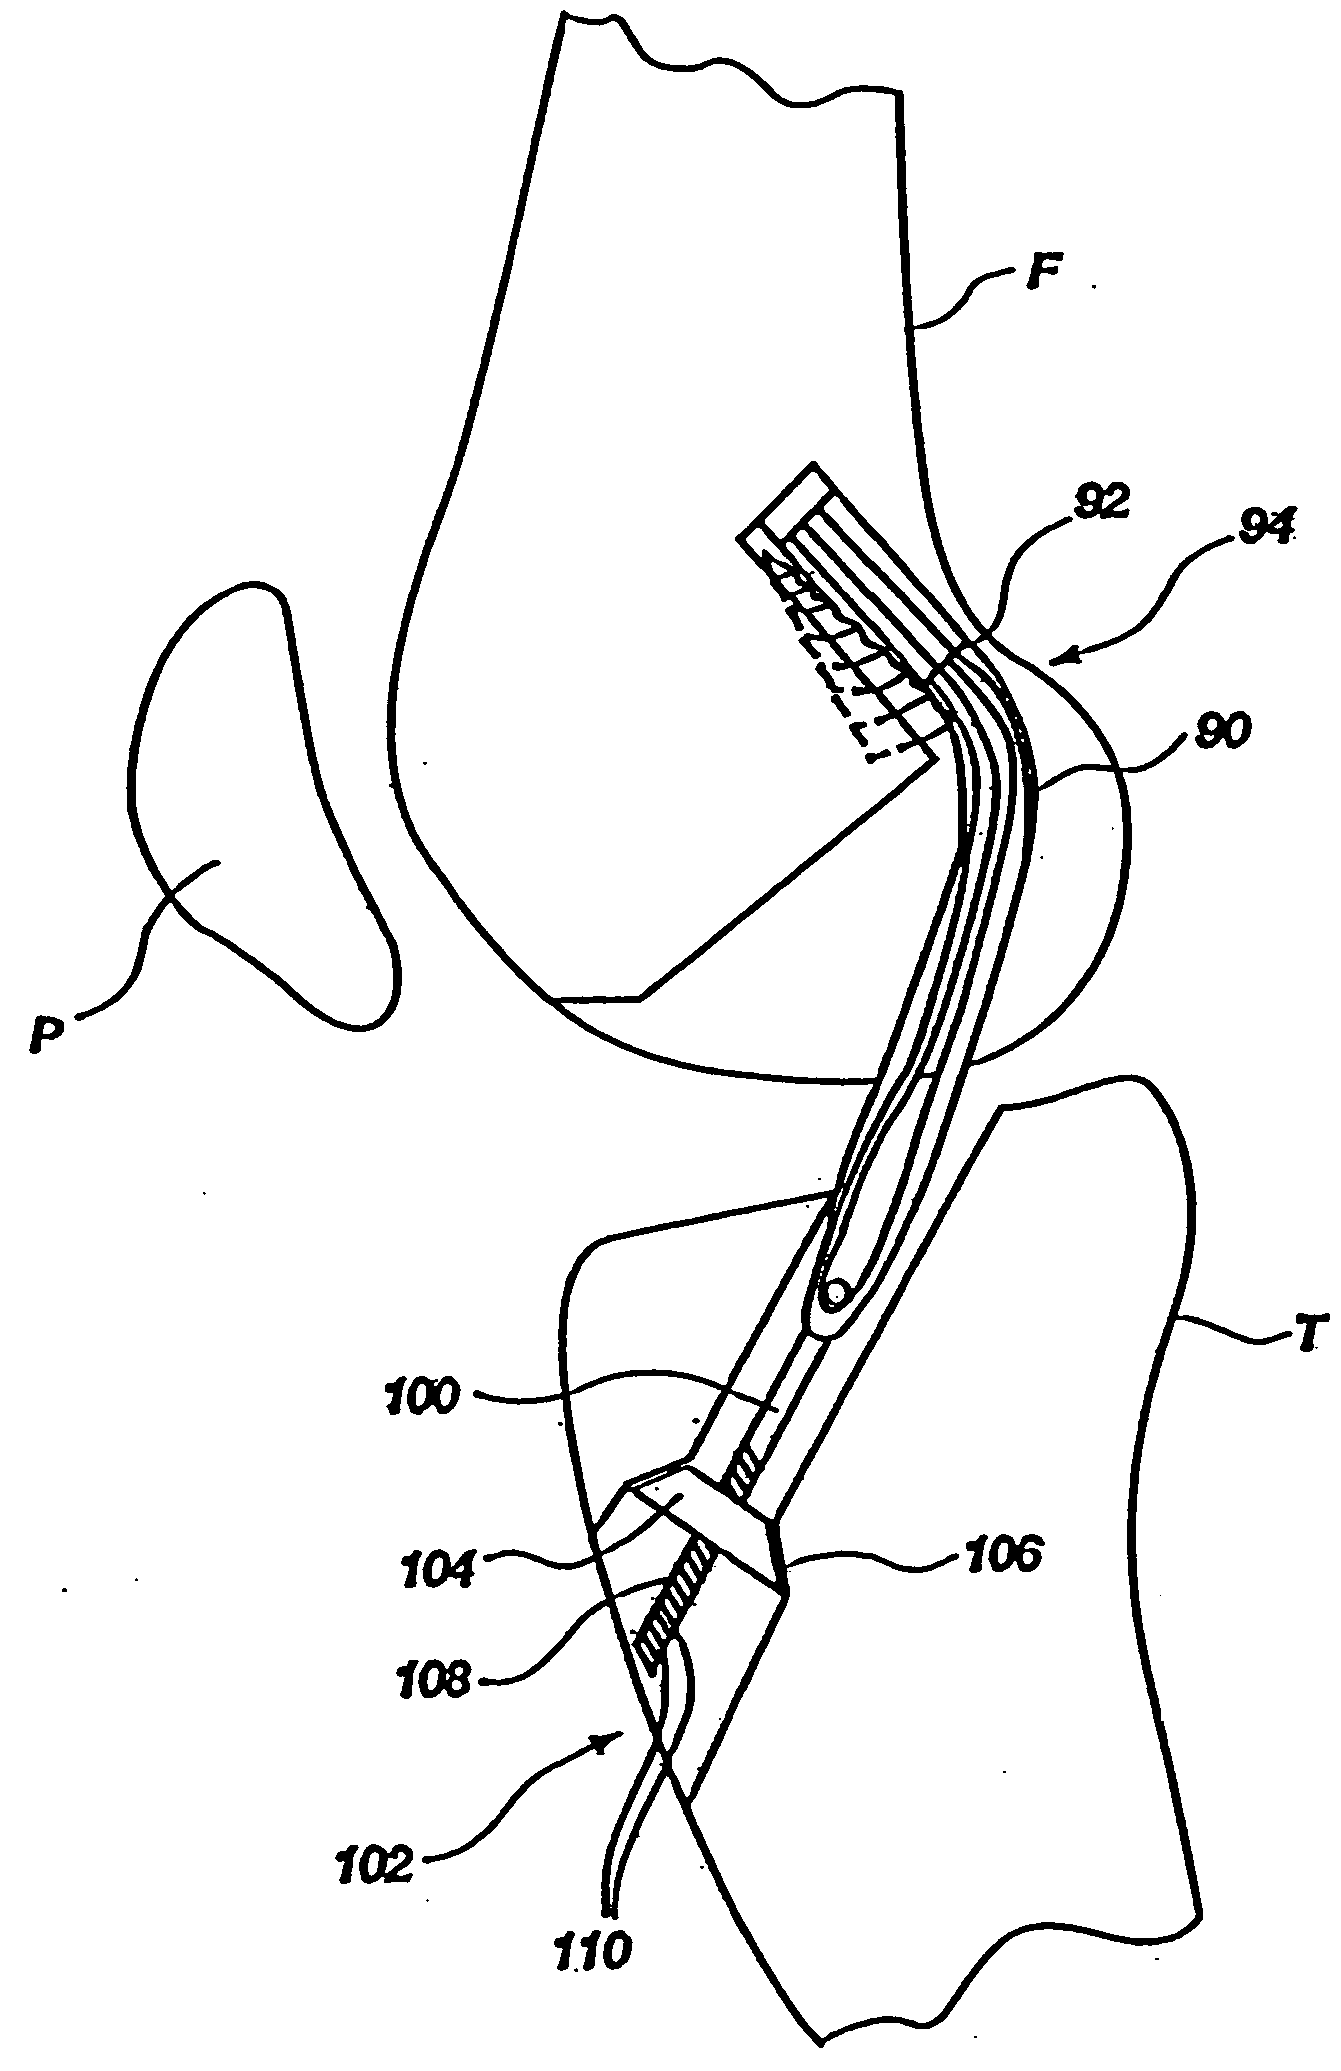 Endosteal tibial ligament fixation with adjustable tensioning